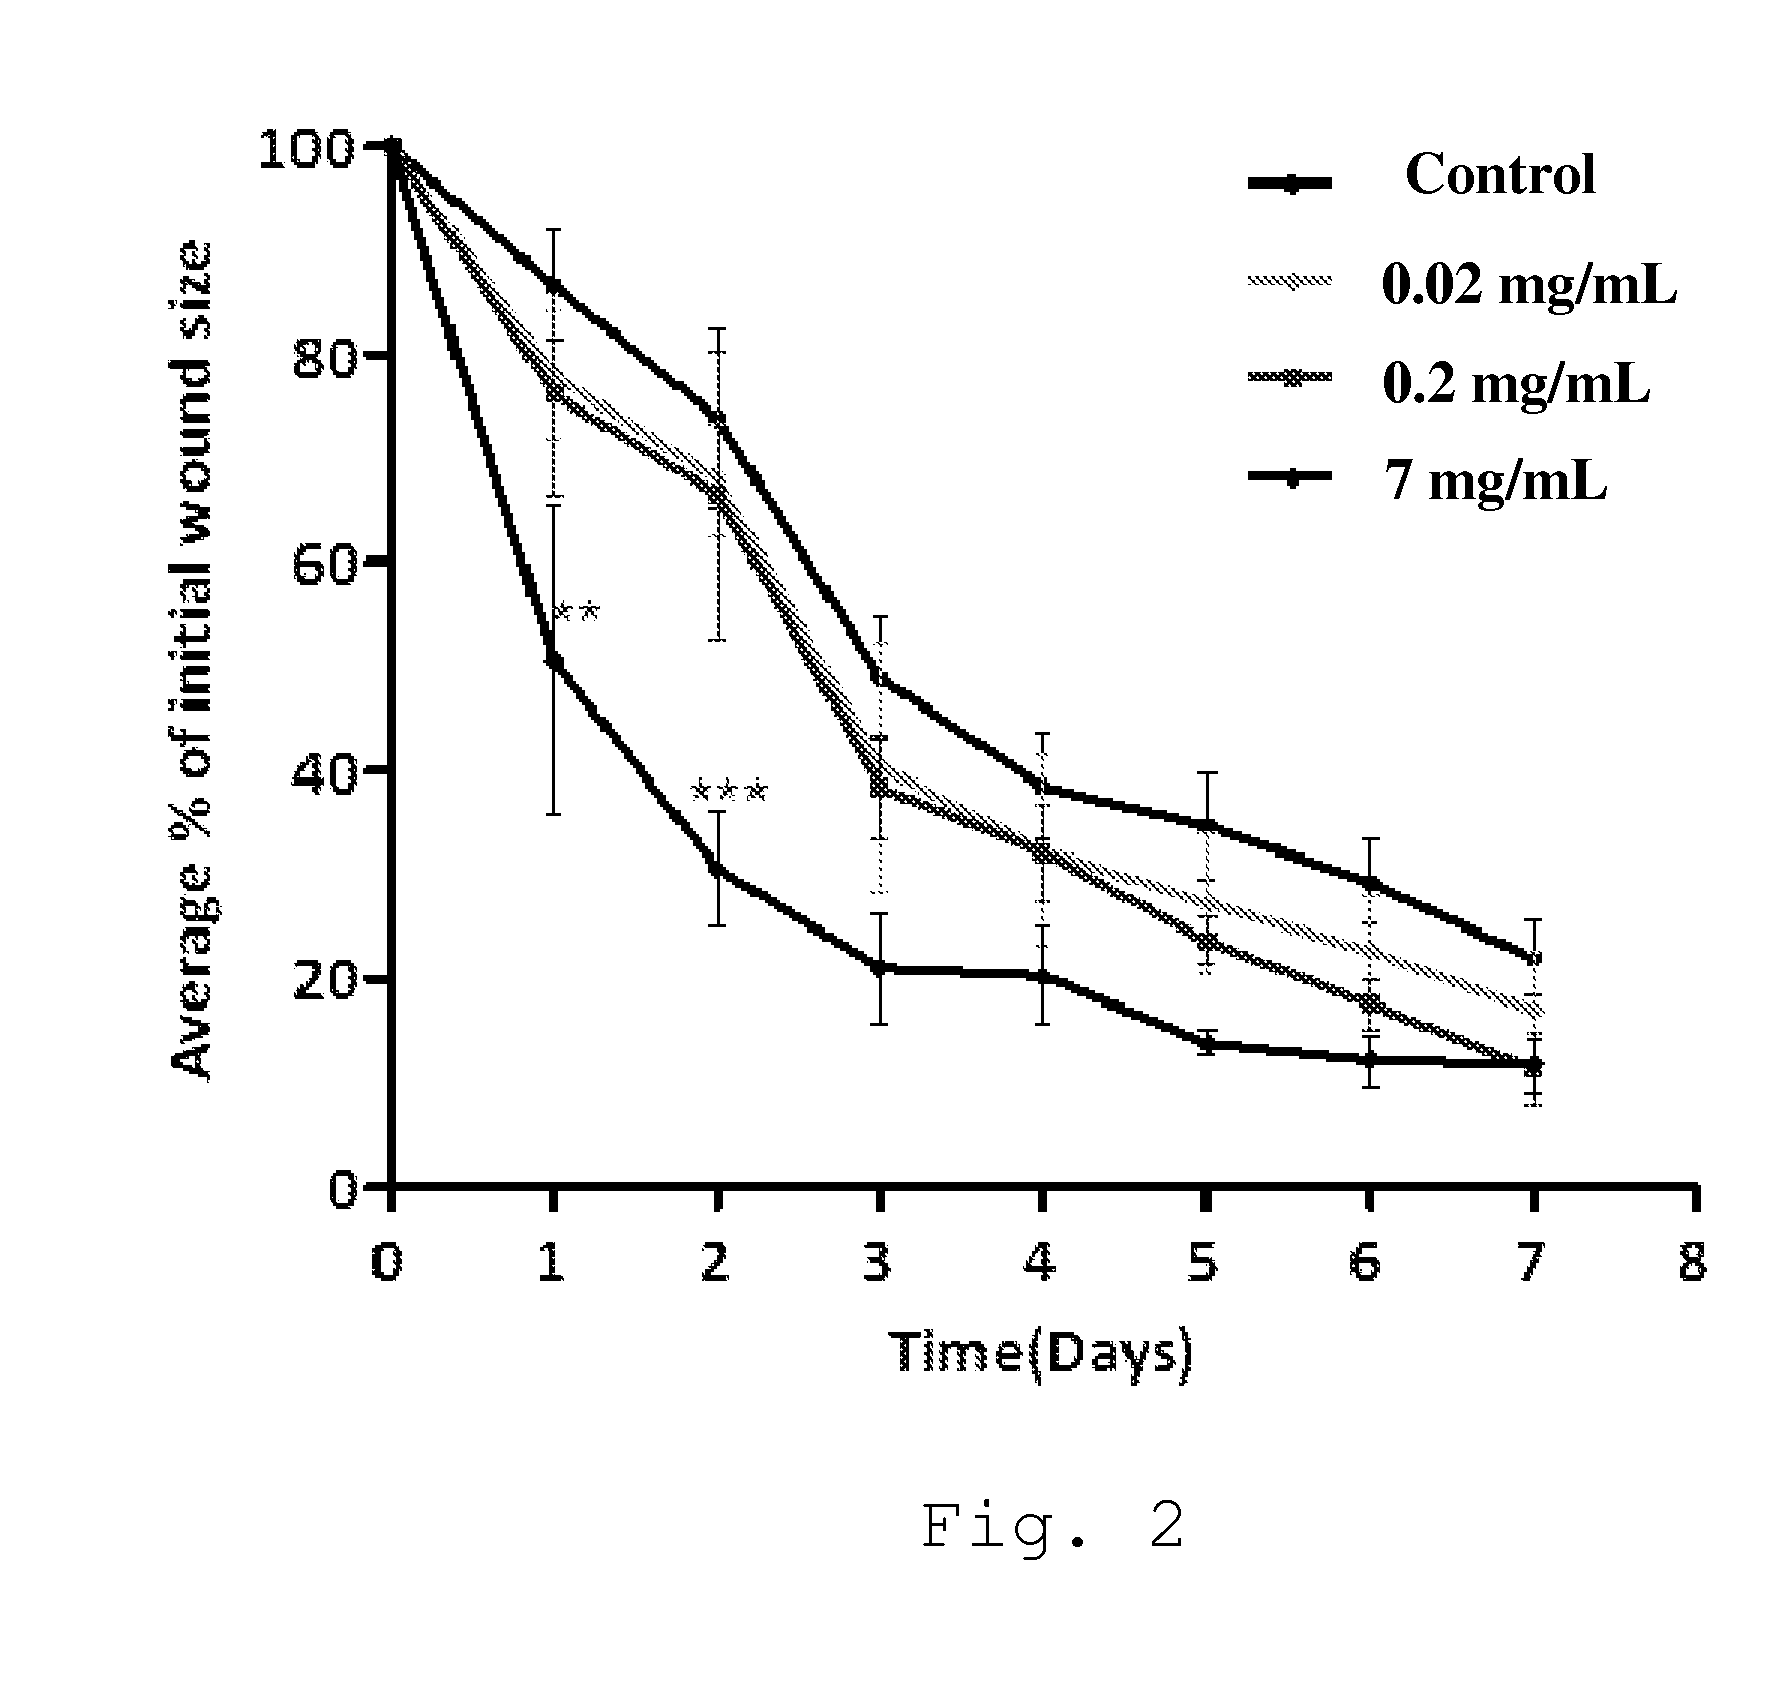 Use of immunomodulatory protein in promotion of wound healing or treatment of tissue injury